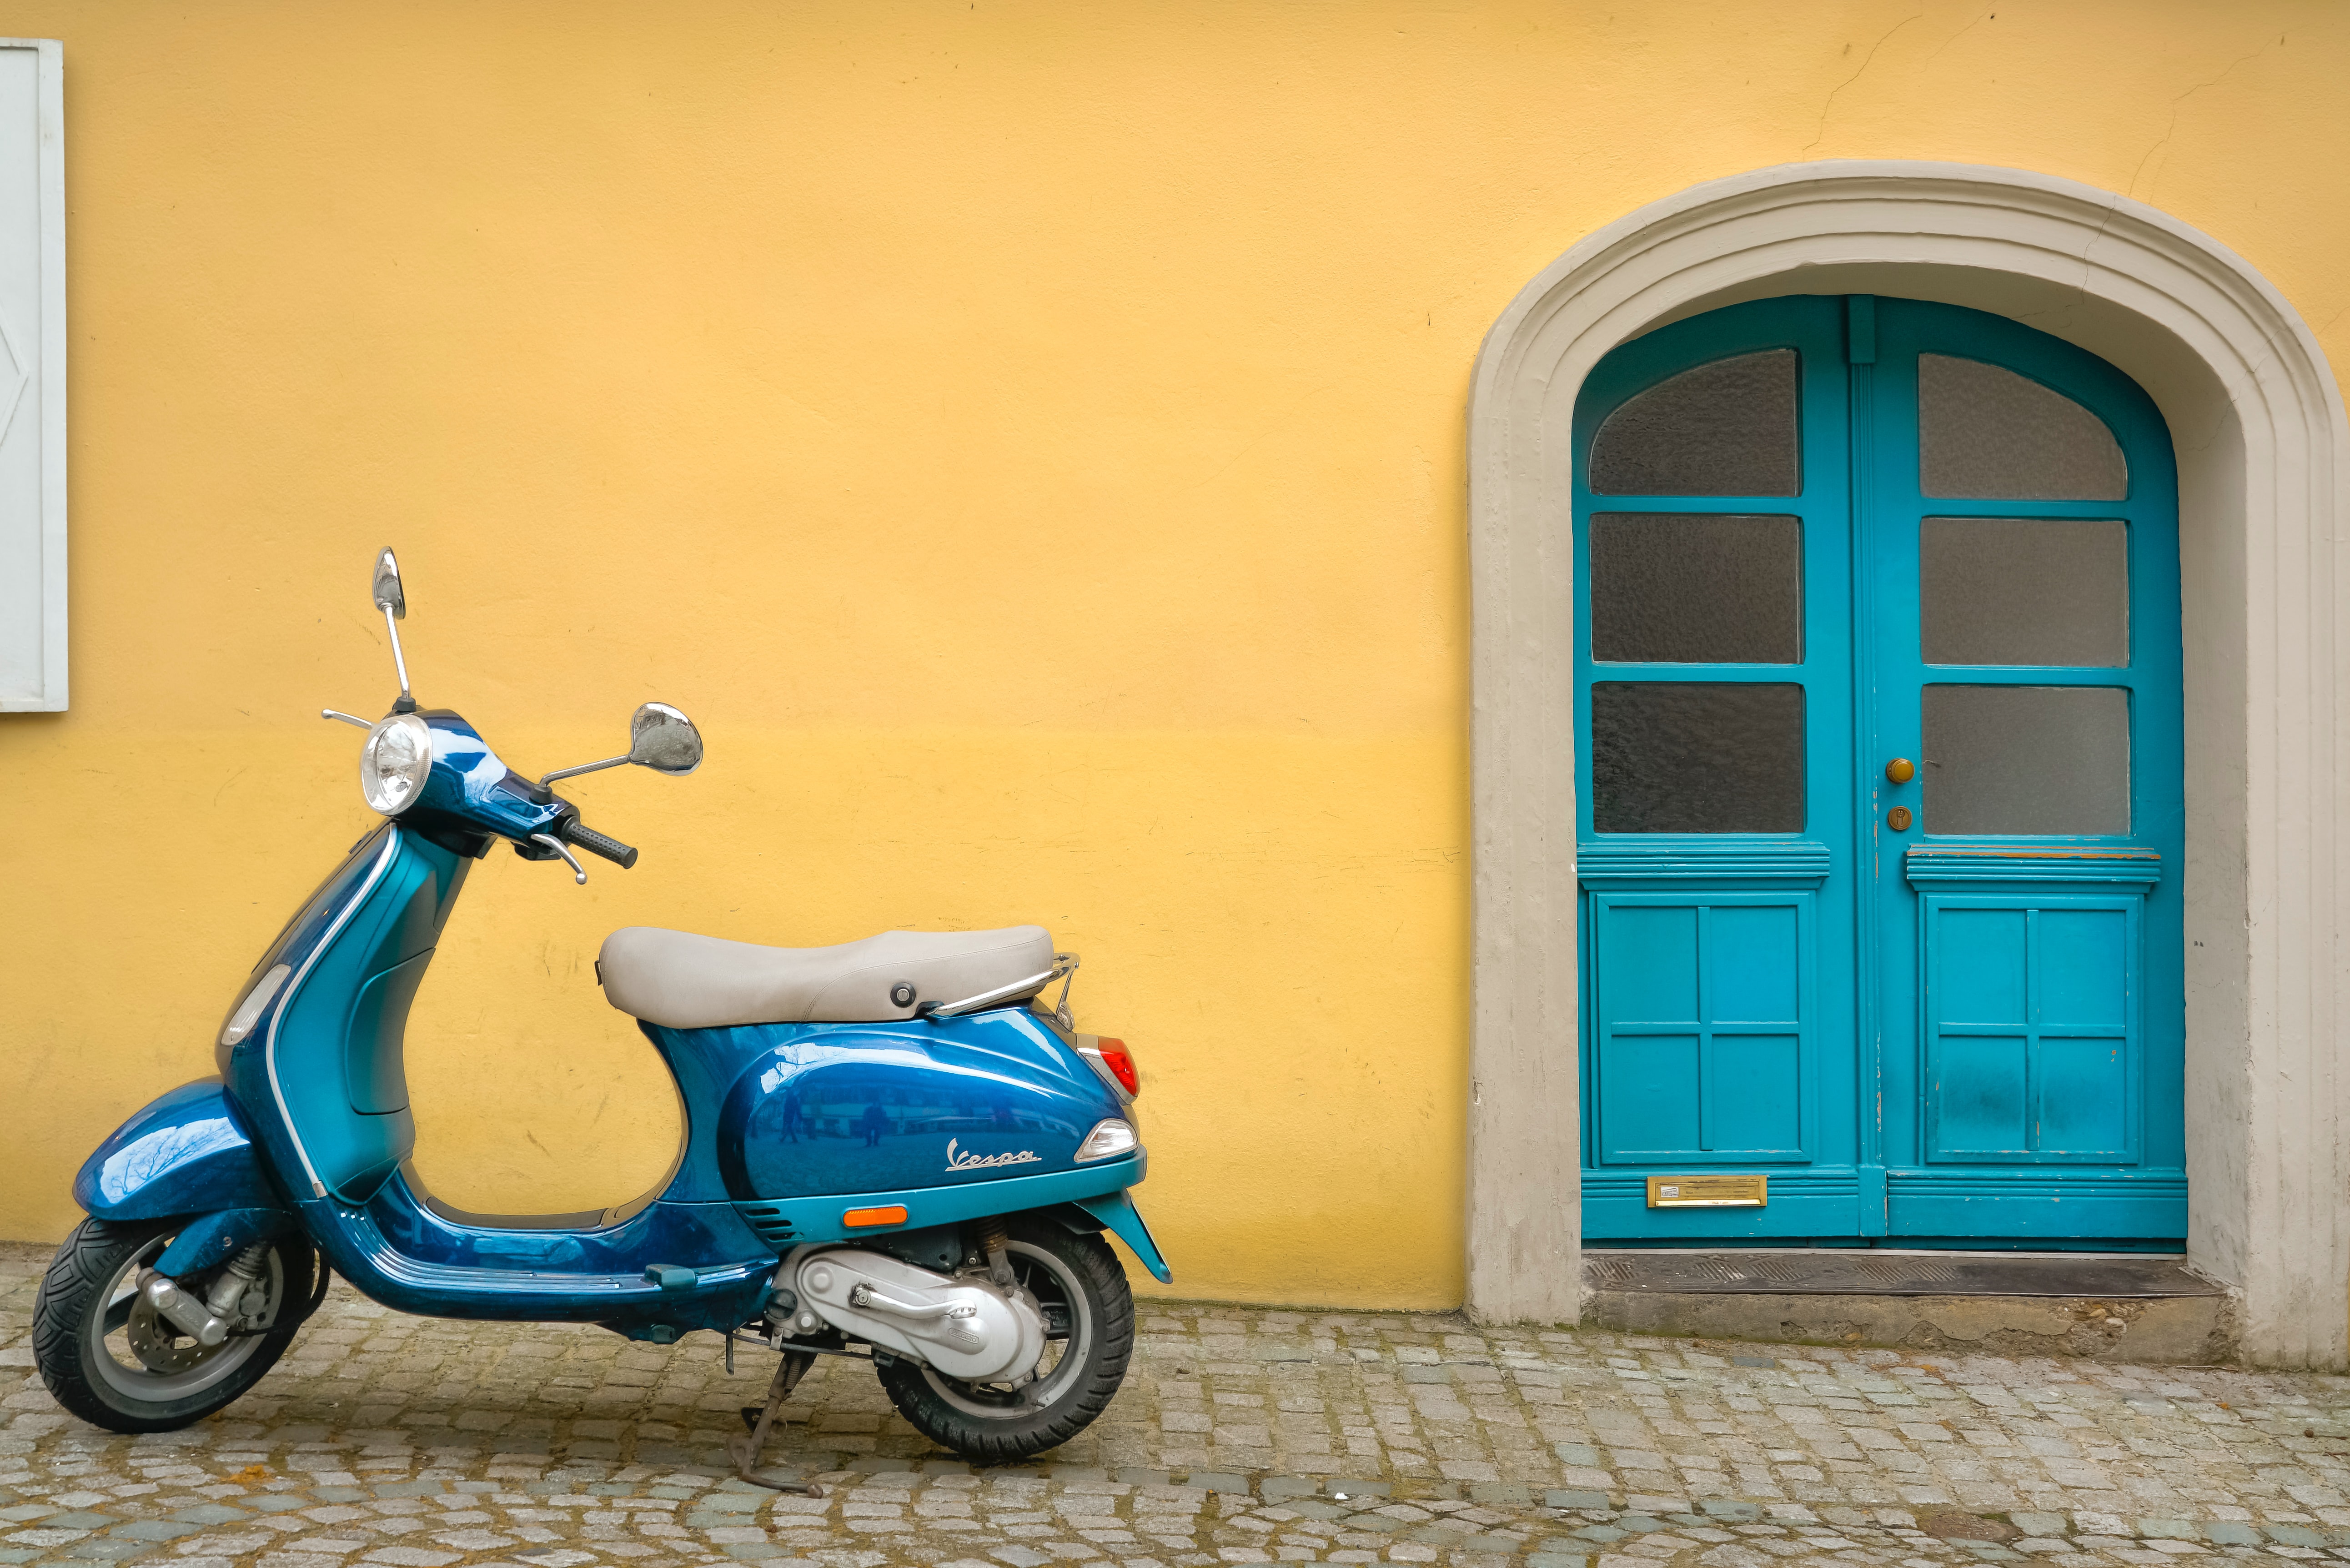 Vespa parked in front of yellow wall